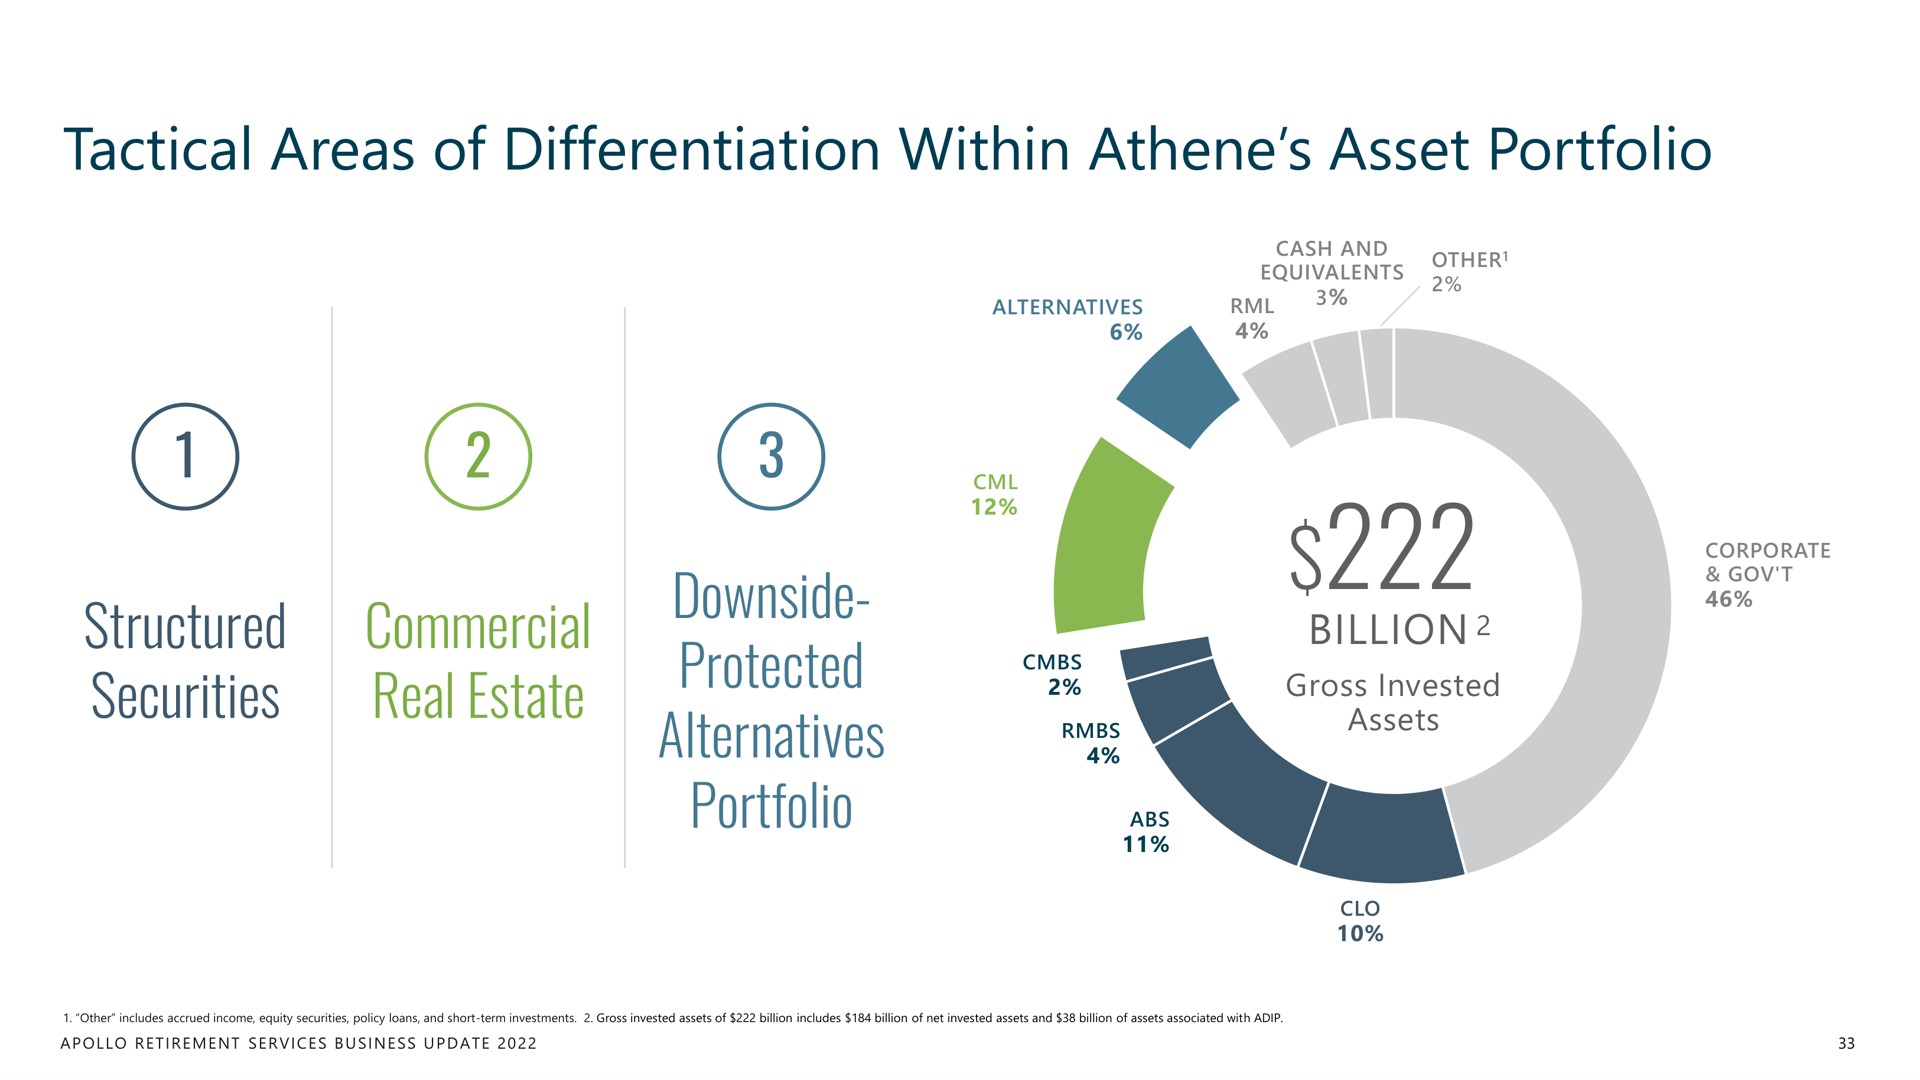 tactical areas of differentiation within asset portfolio structured securities commercial real estate downside protected alternatives portfolio | Apollo Global Management